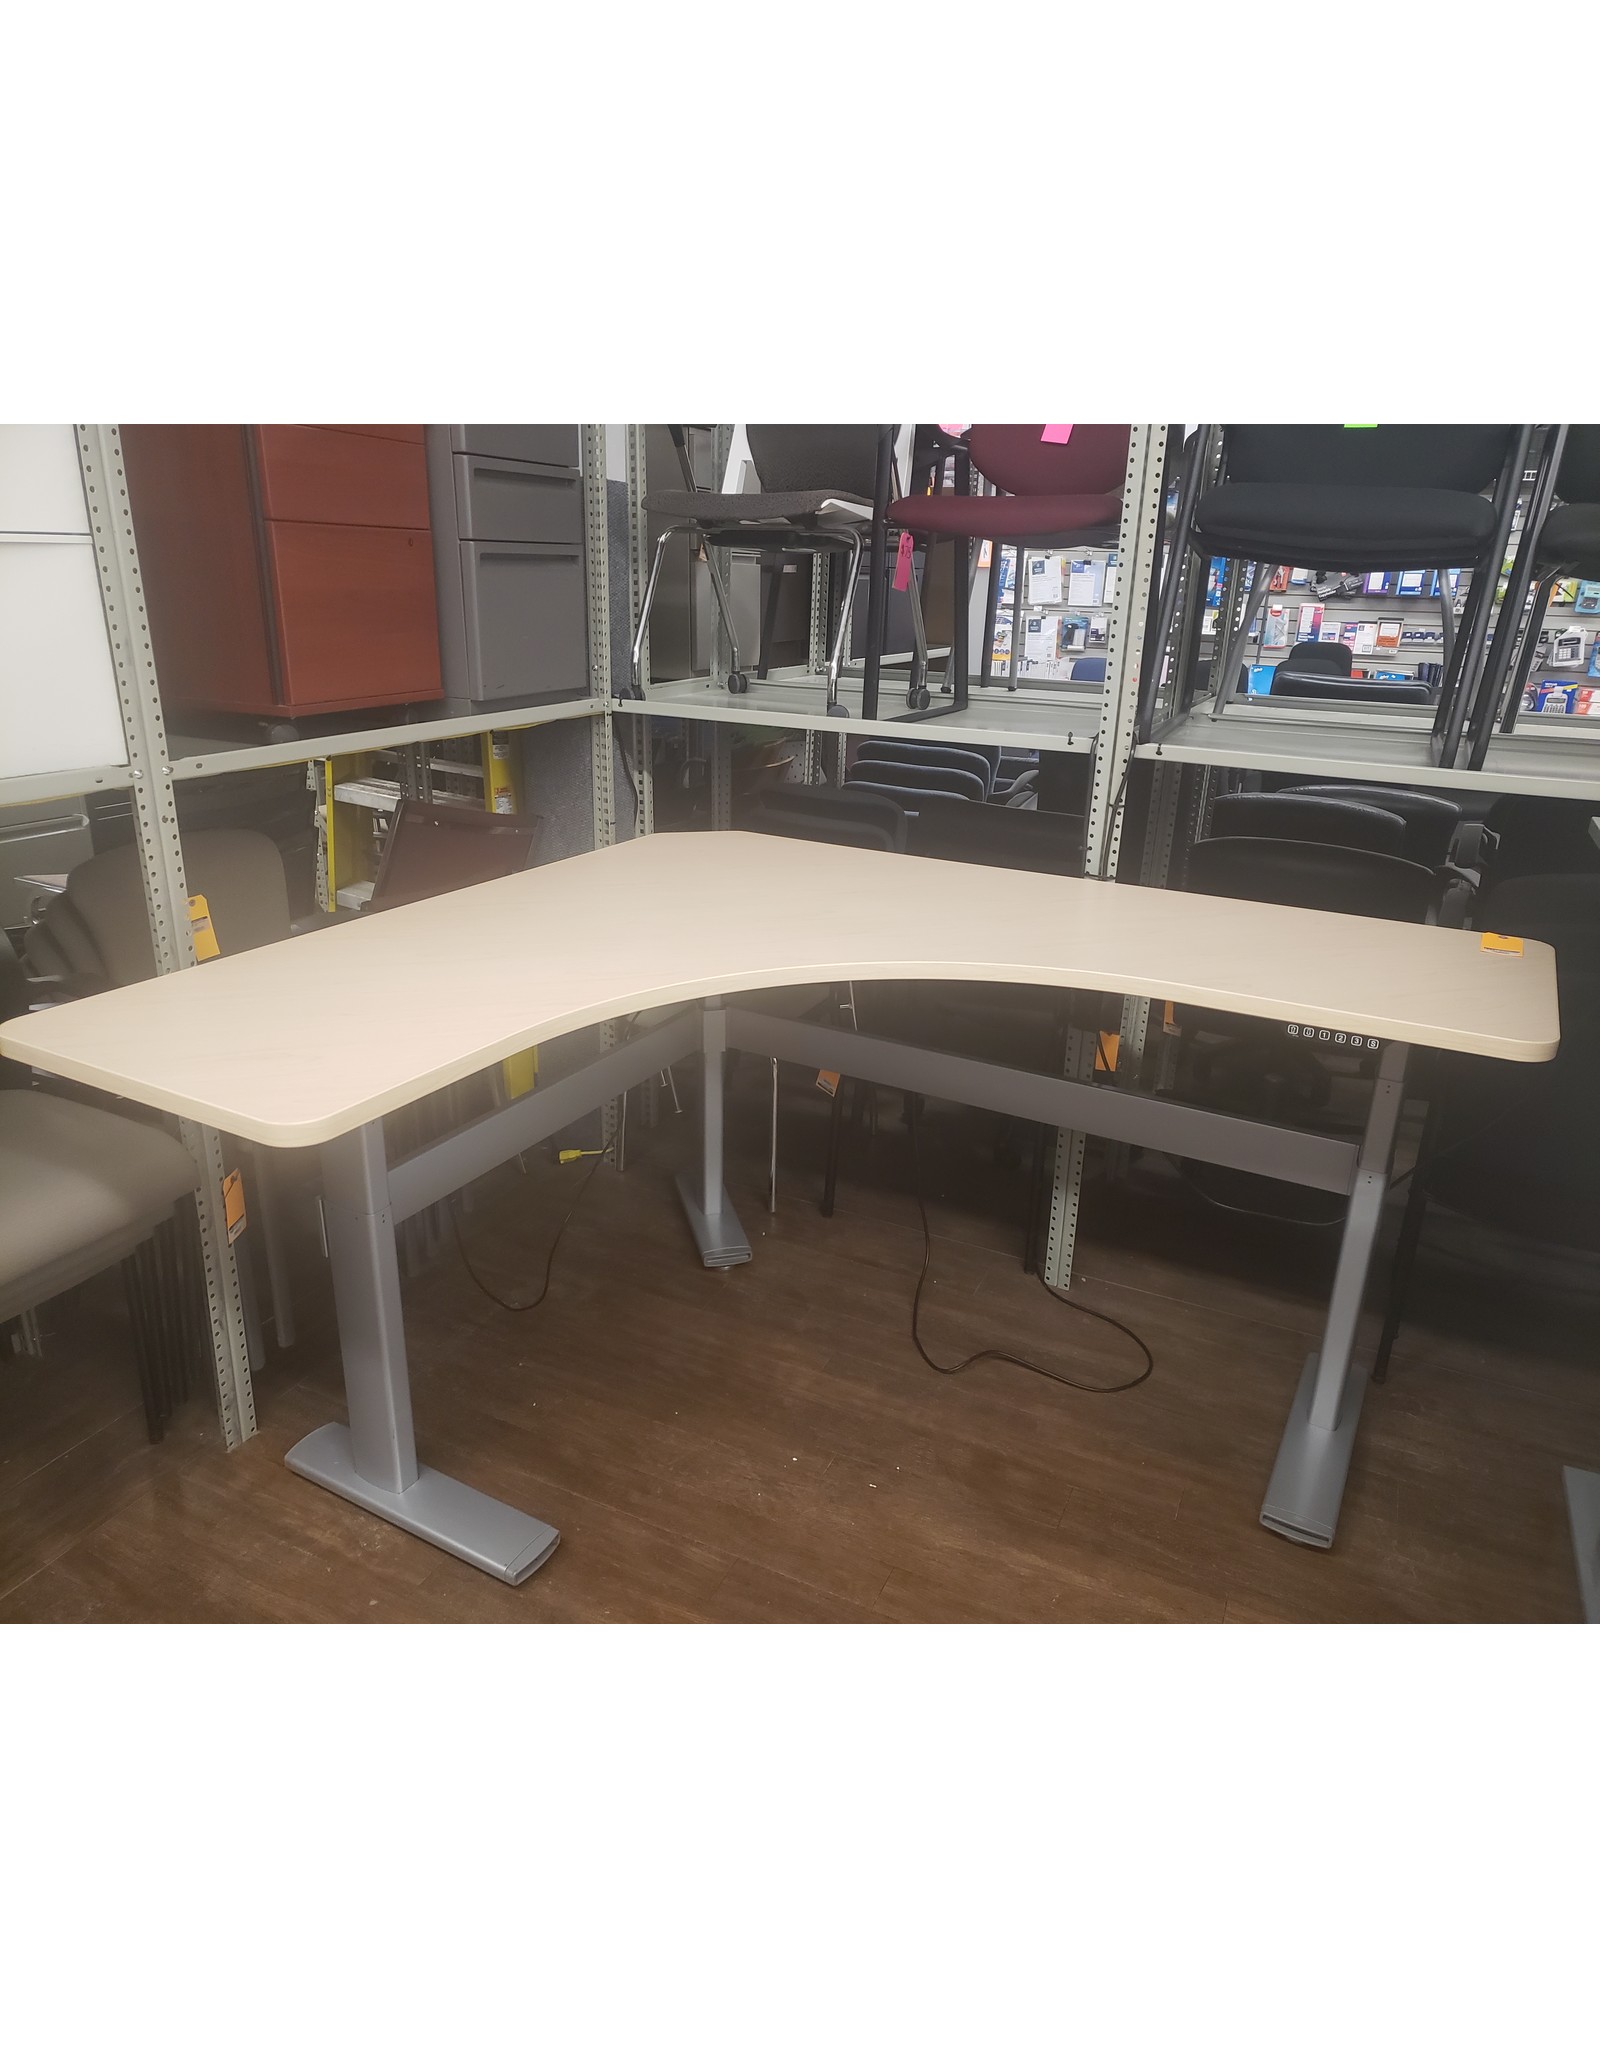 Pre-Owned Steelcase 6X5 Electronic Height Adjustable desk